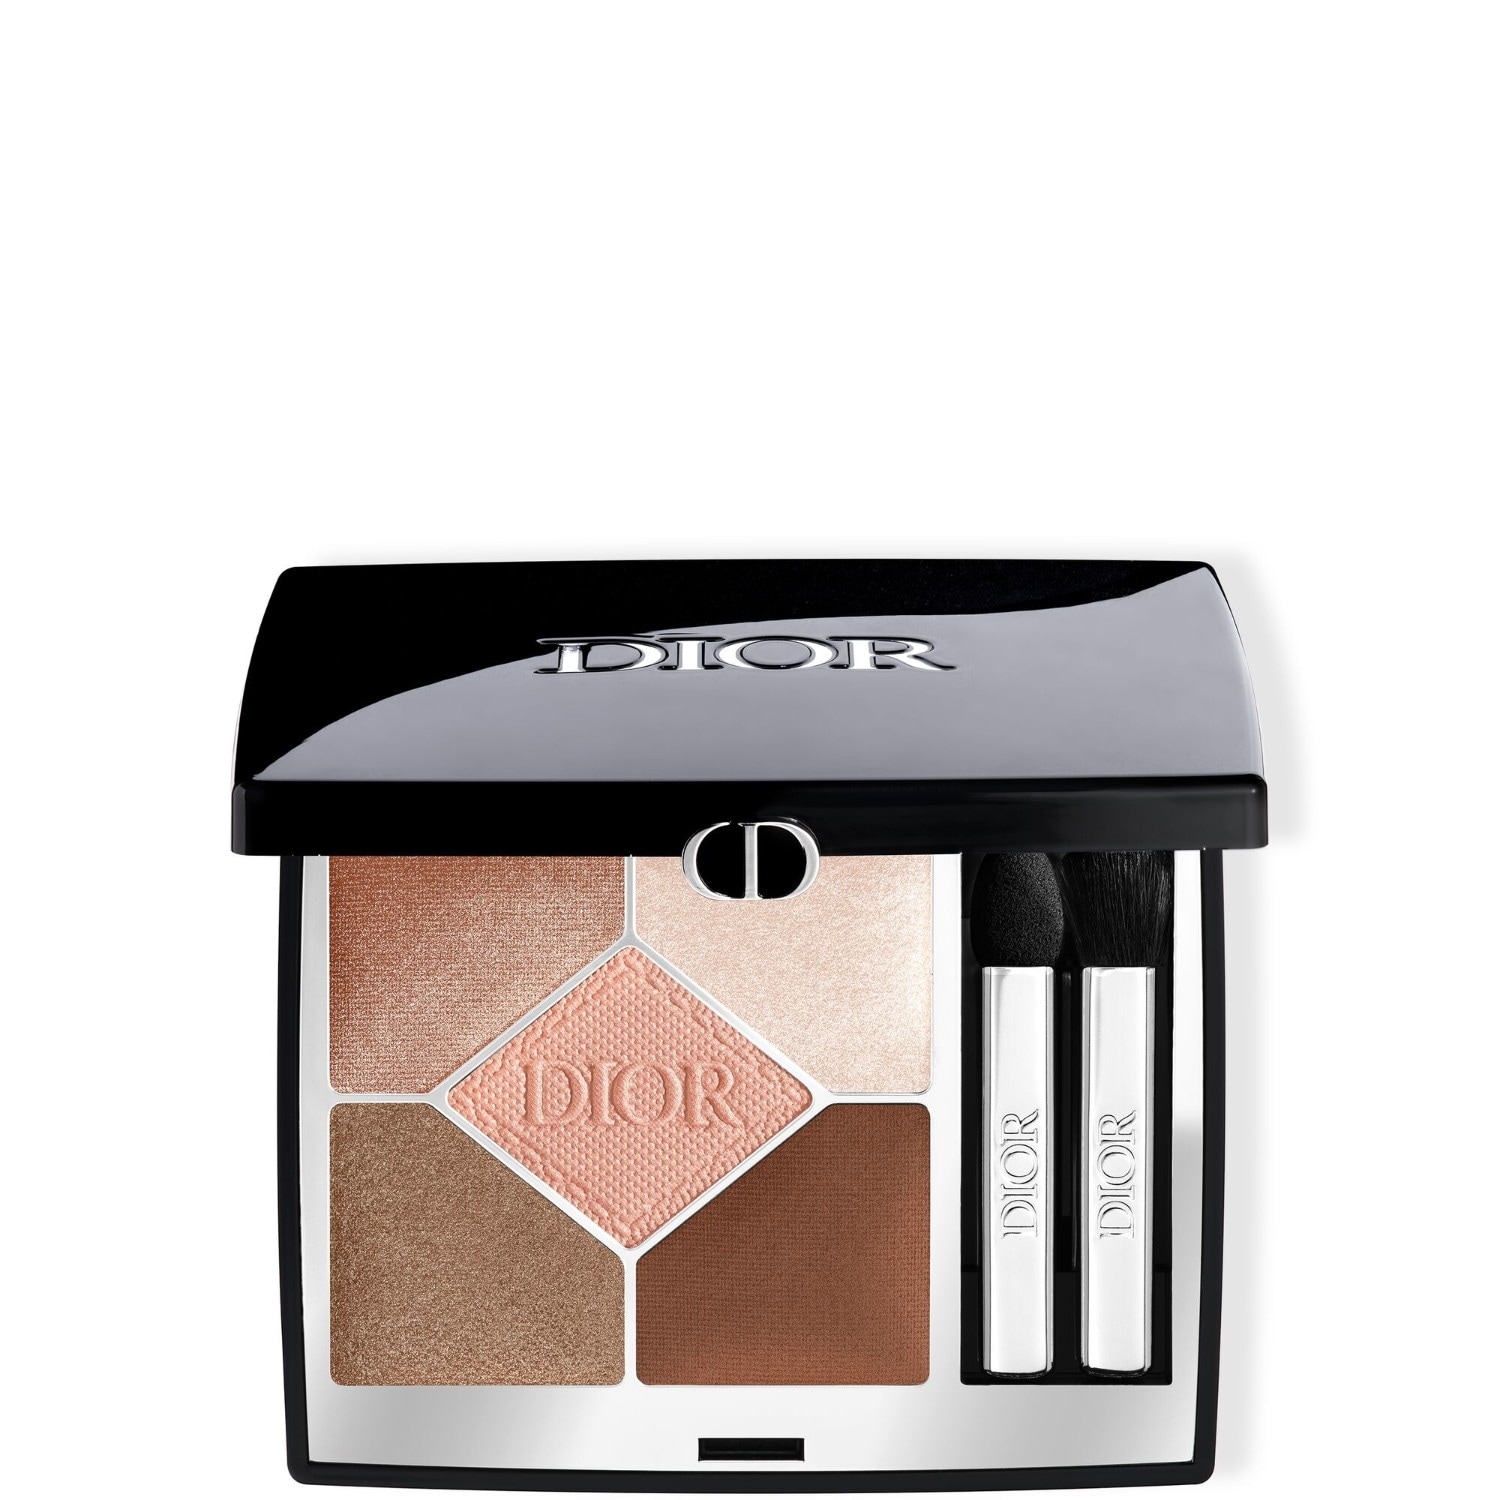 Diorshow Diorshow 5 Couleurs eyeshadow palette - creamy texture - long hold and comfort